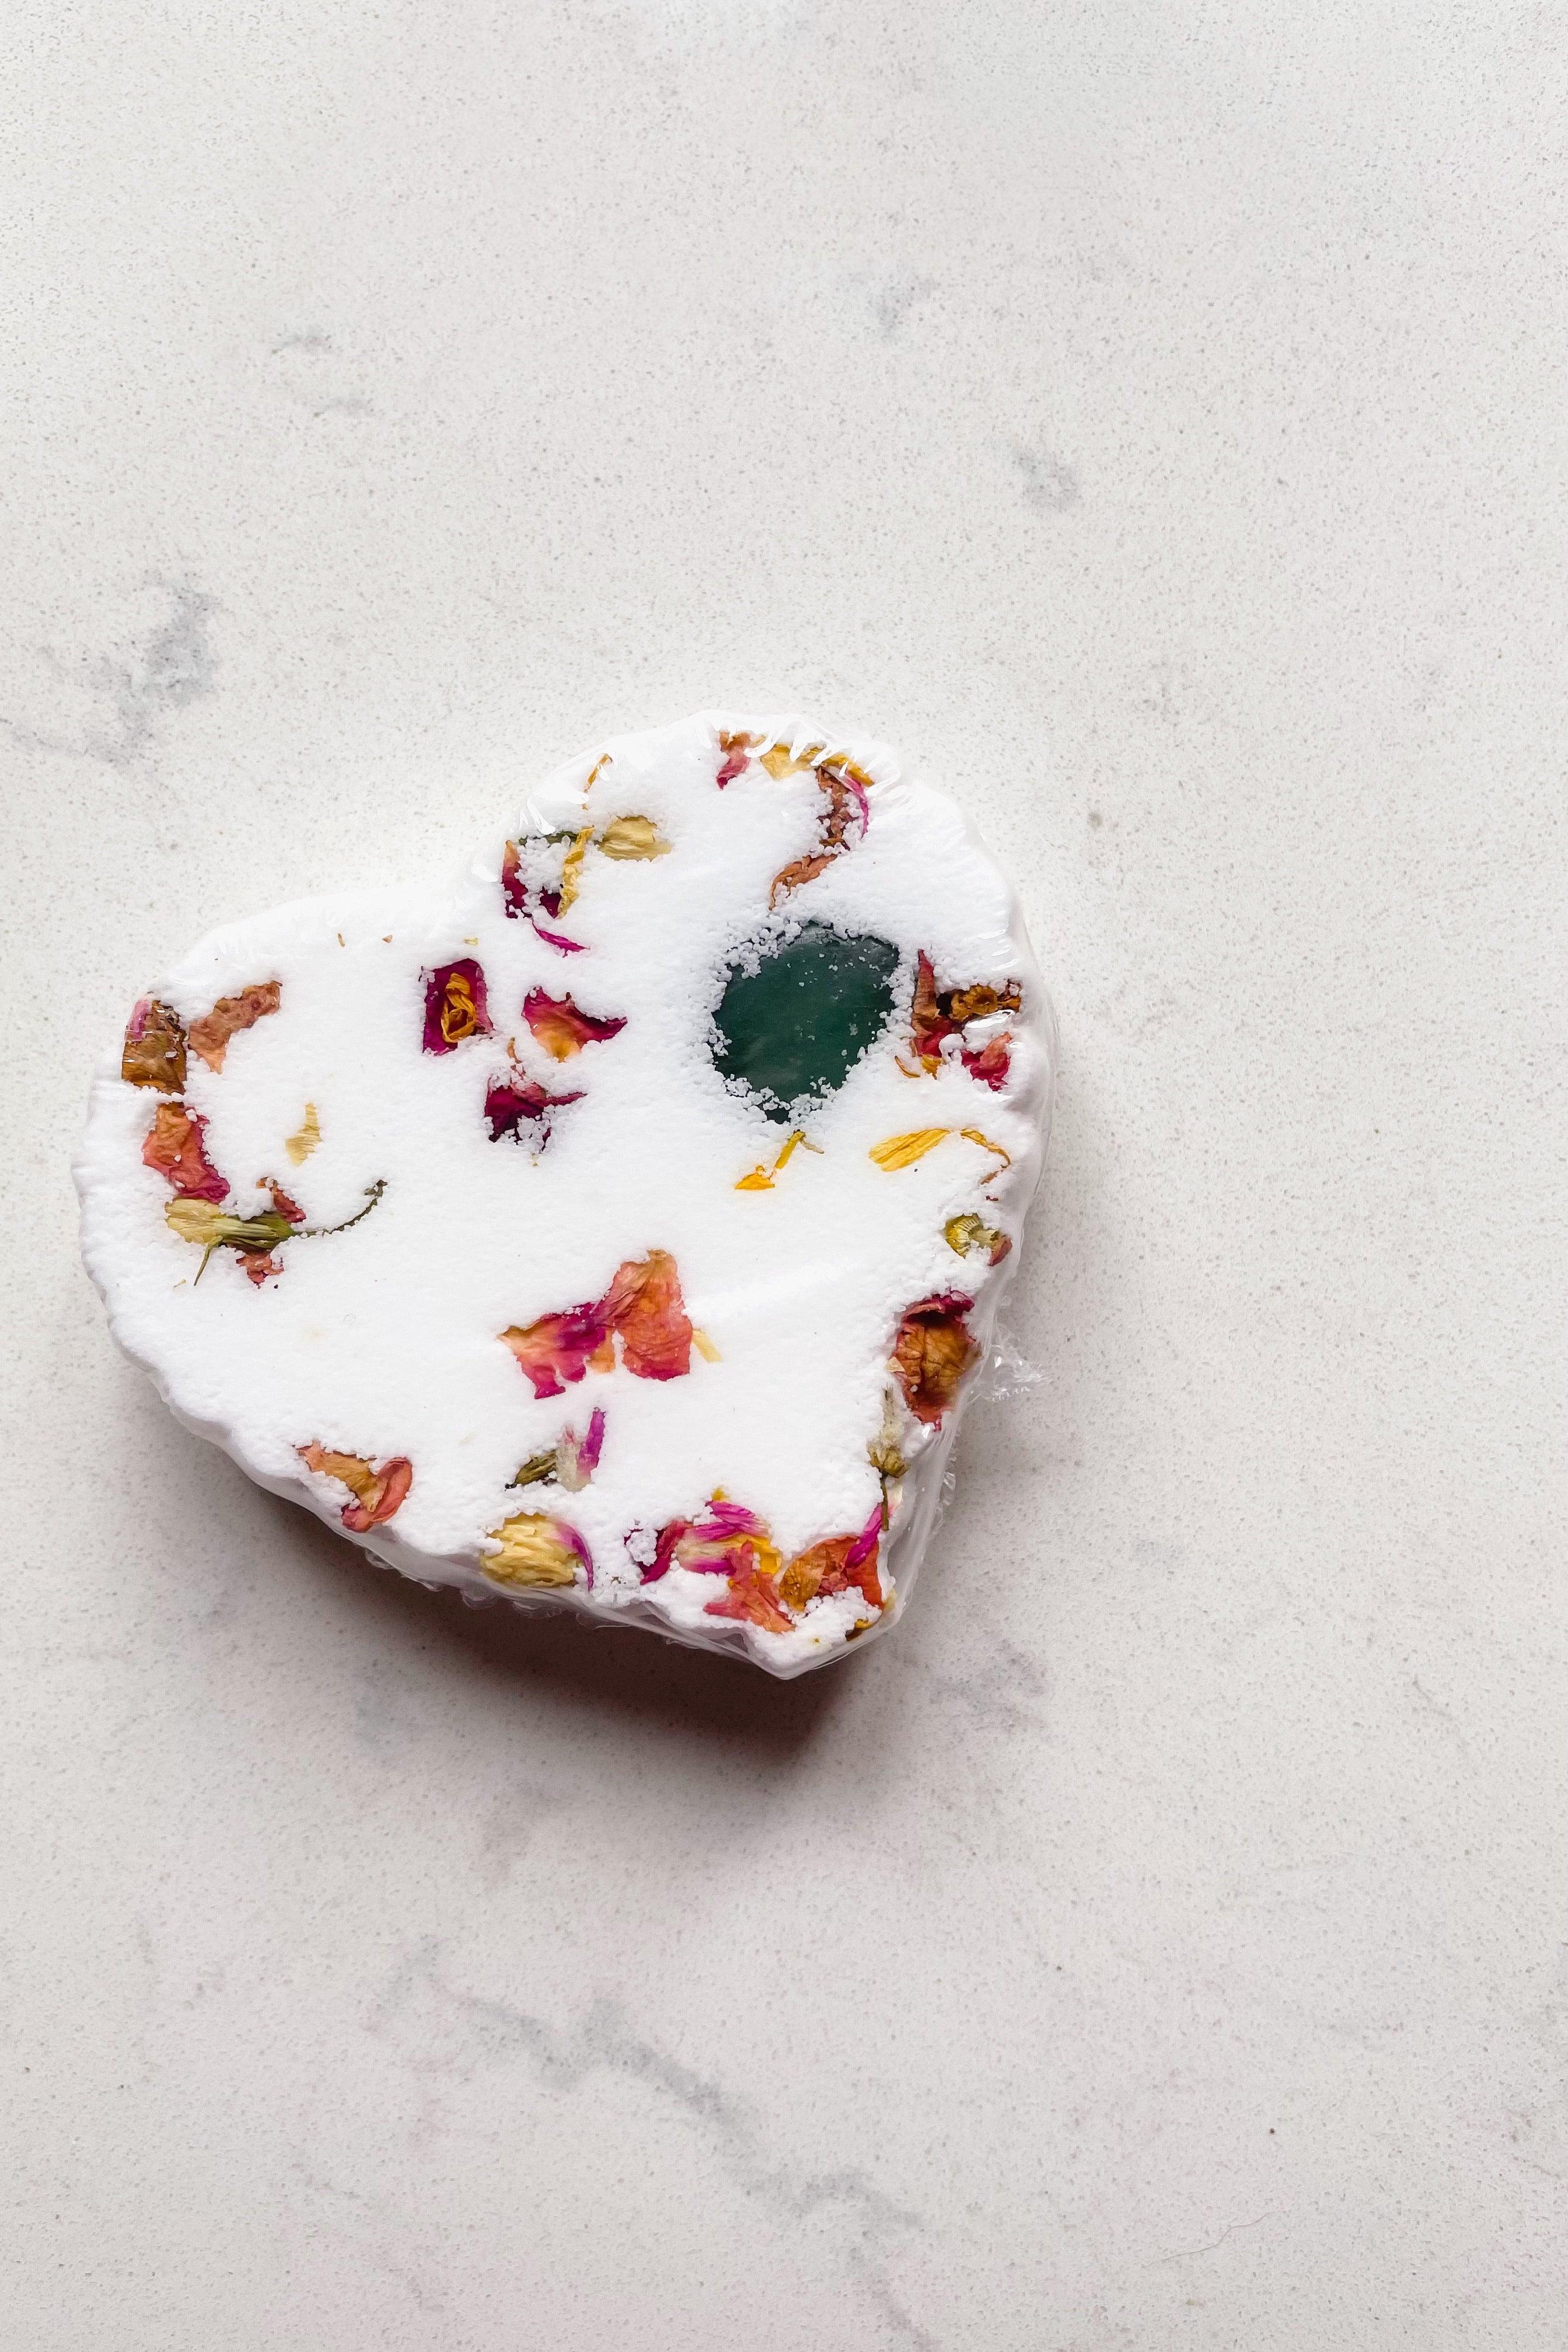 Have A Heart Crystal Bath Bomb - Atomic Wildflower